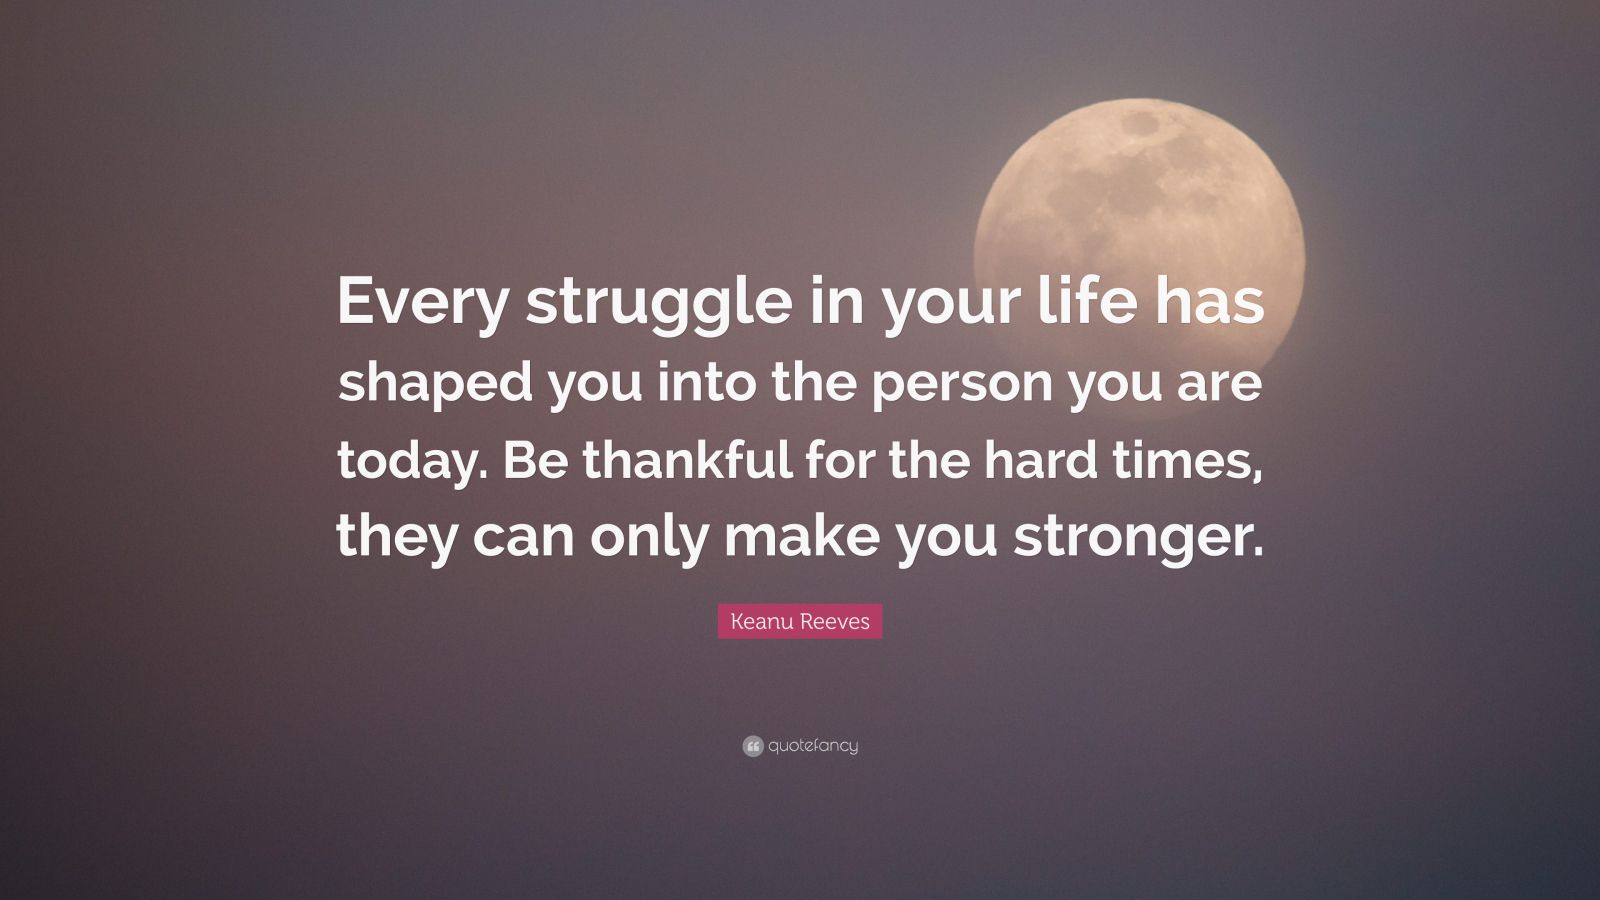 Keanu Reeves Quote: “Every struggle in your life has shaped you into